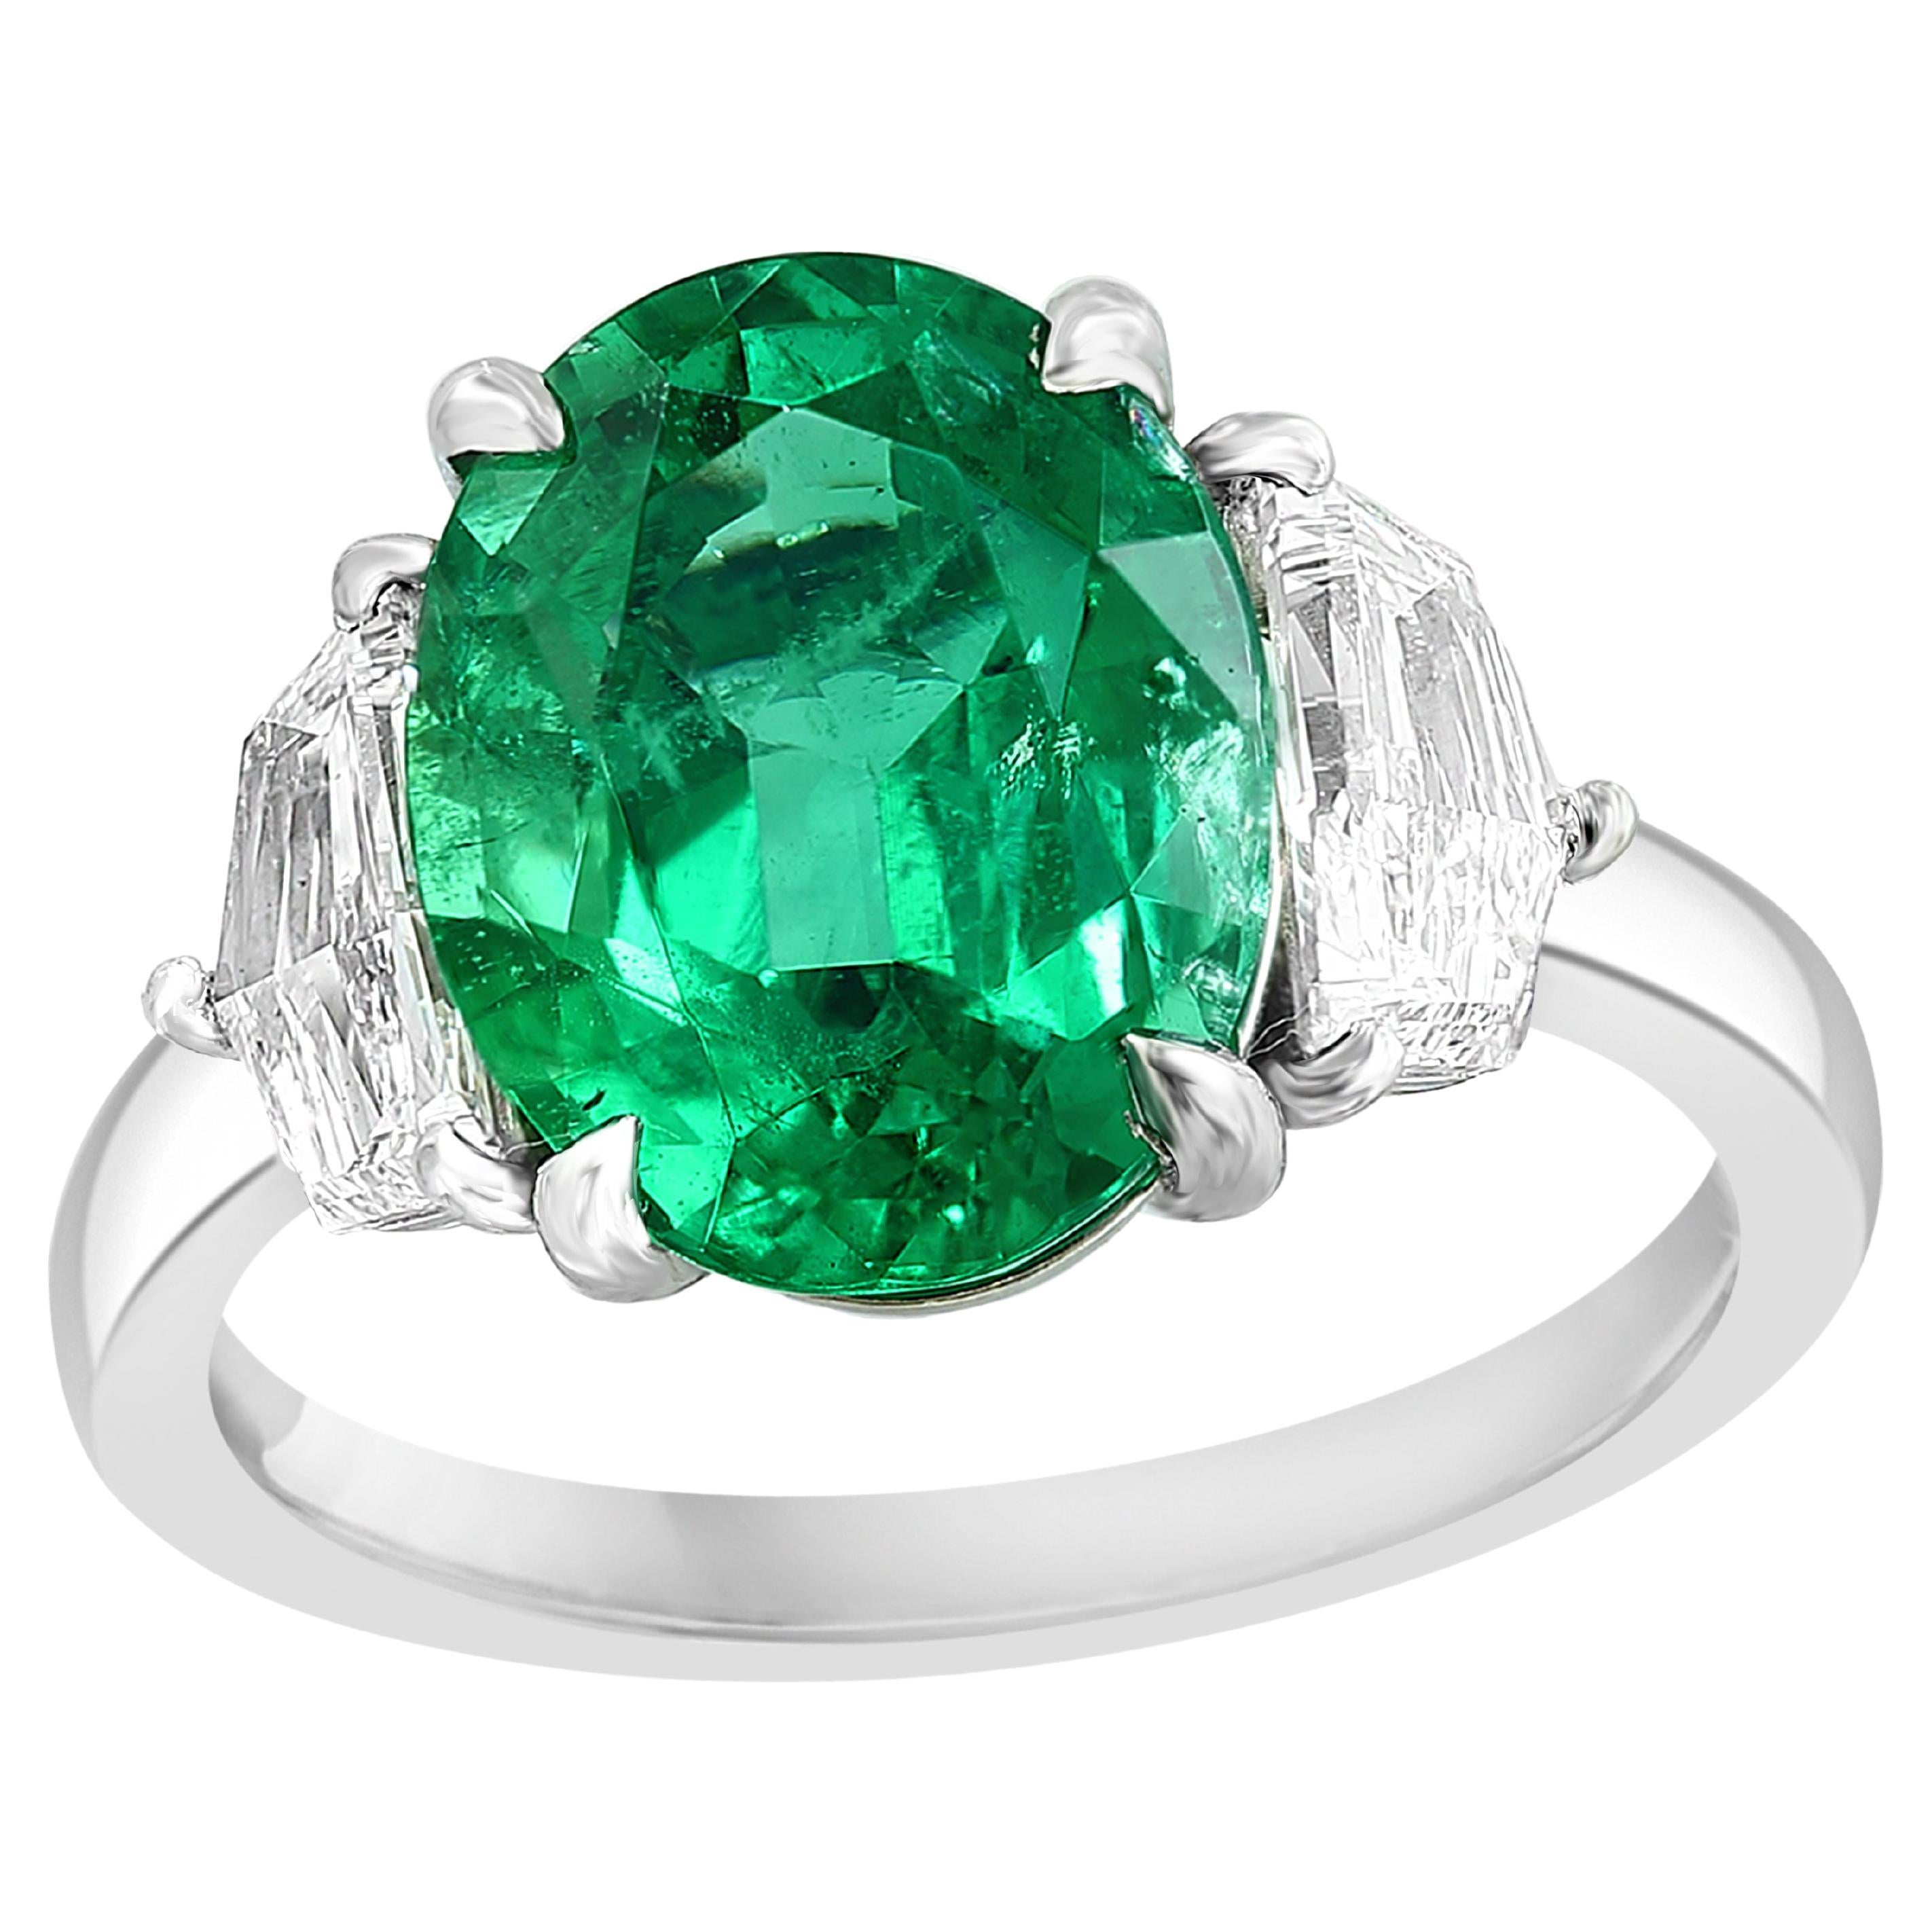 Certified 2.72 Carat Oval Cut Emerald Diamond Engagement Ring in Platinum For Sale